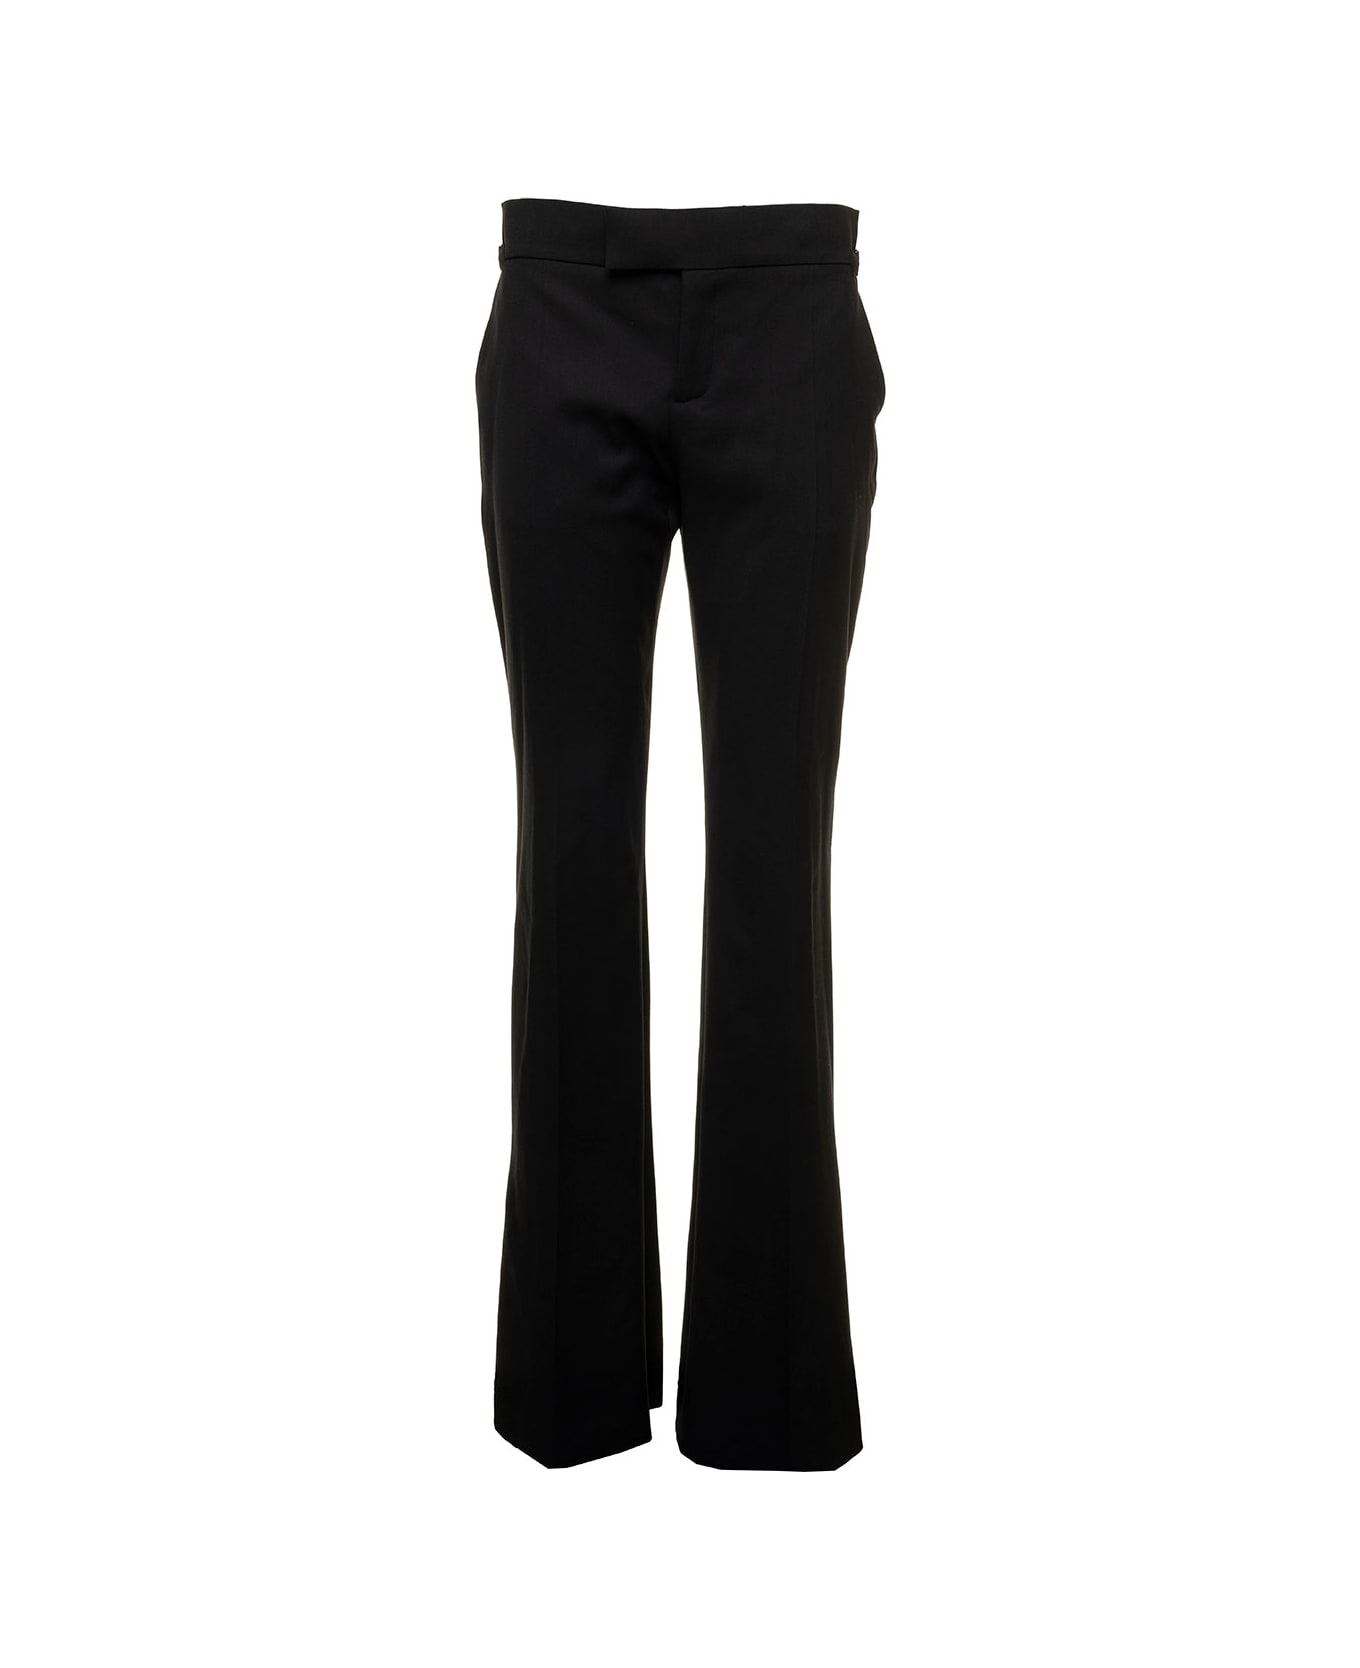 Tom Ford Black Flared Trousers In Grain De Poudre Tom Ford Woman - Black